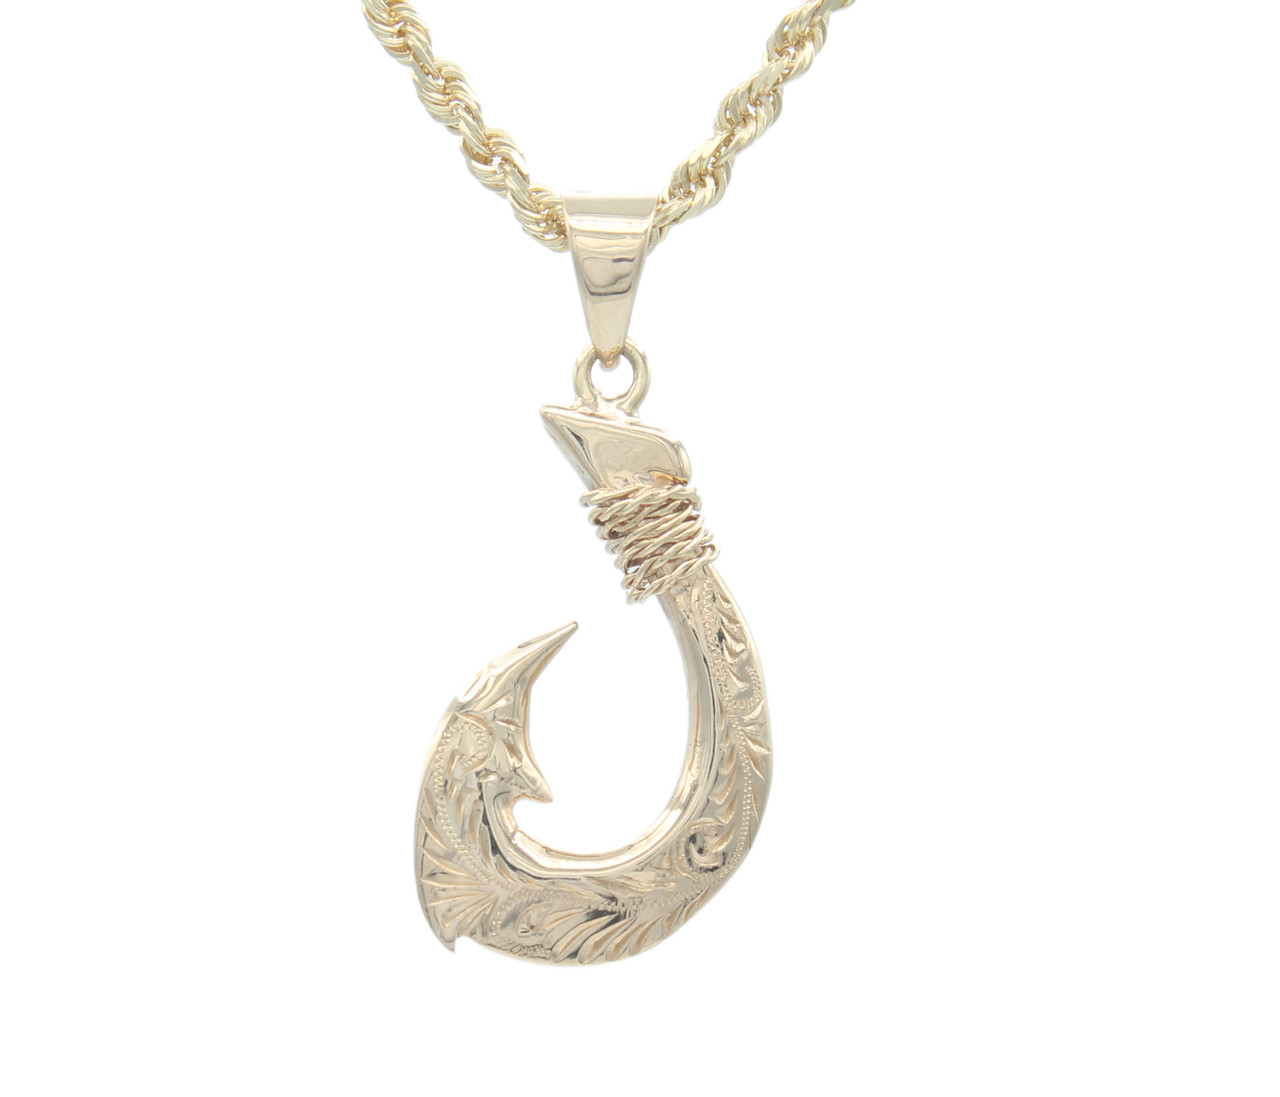 Hawaiian Style Fish Hook Pendant Small: 1 inch Tall Large - Up to 6mm Chain